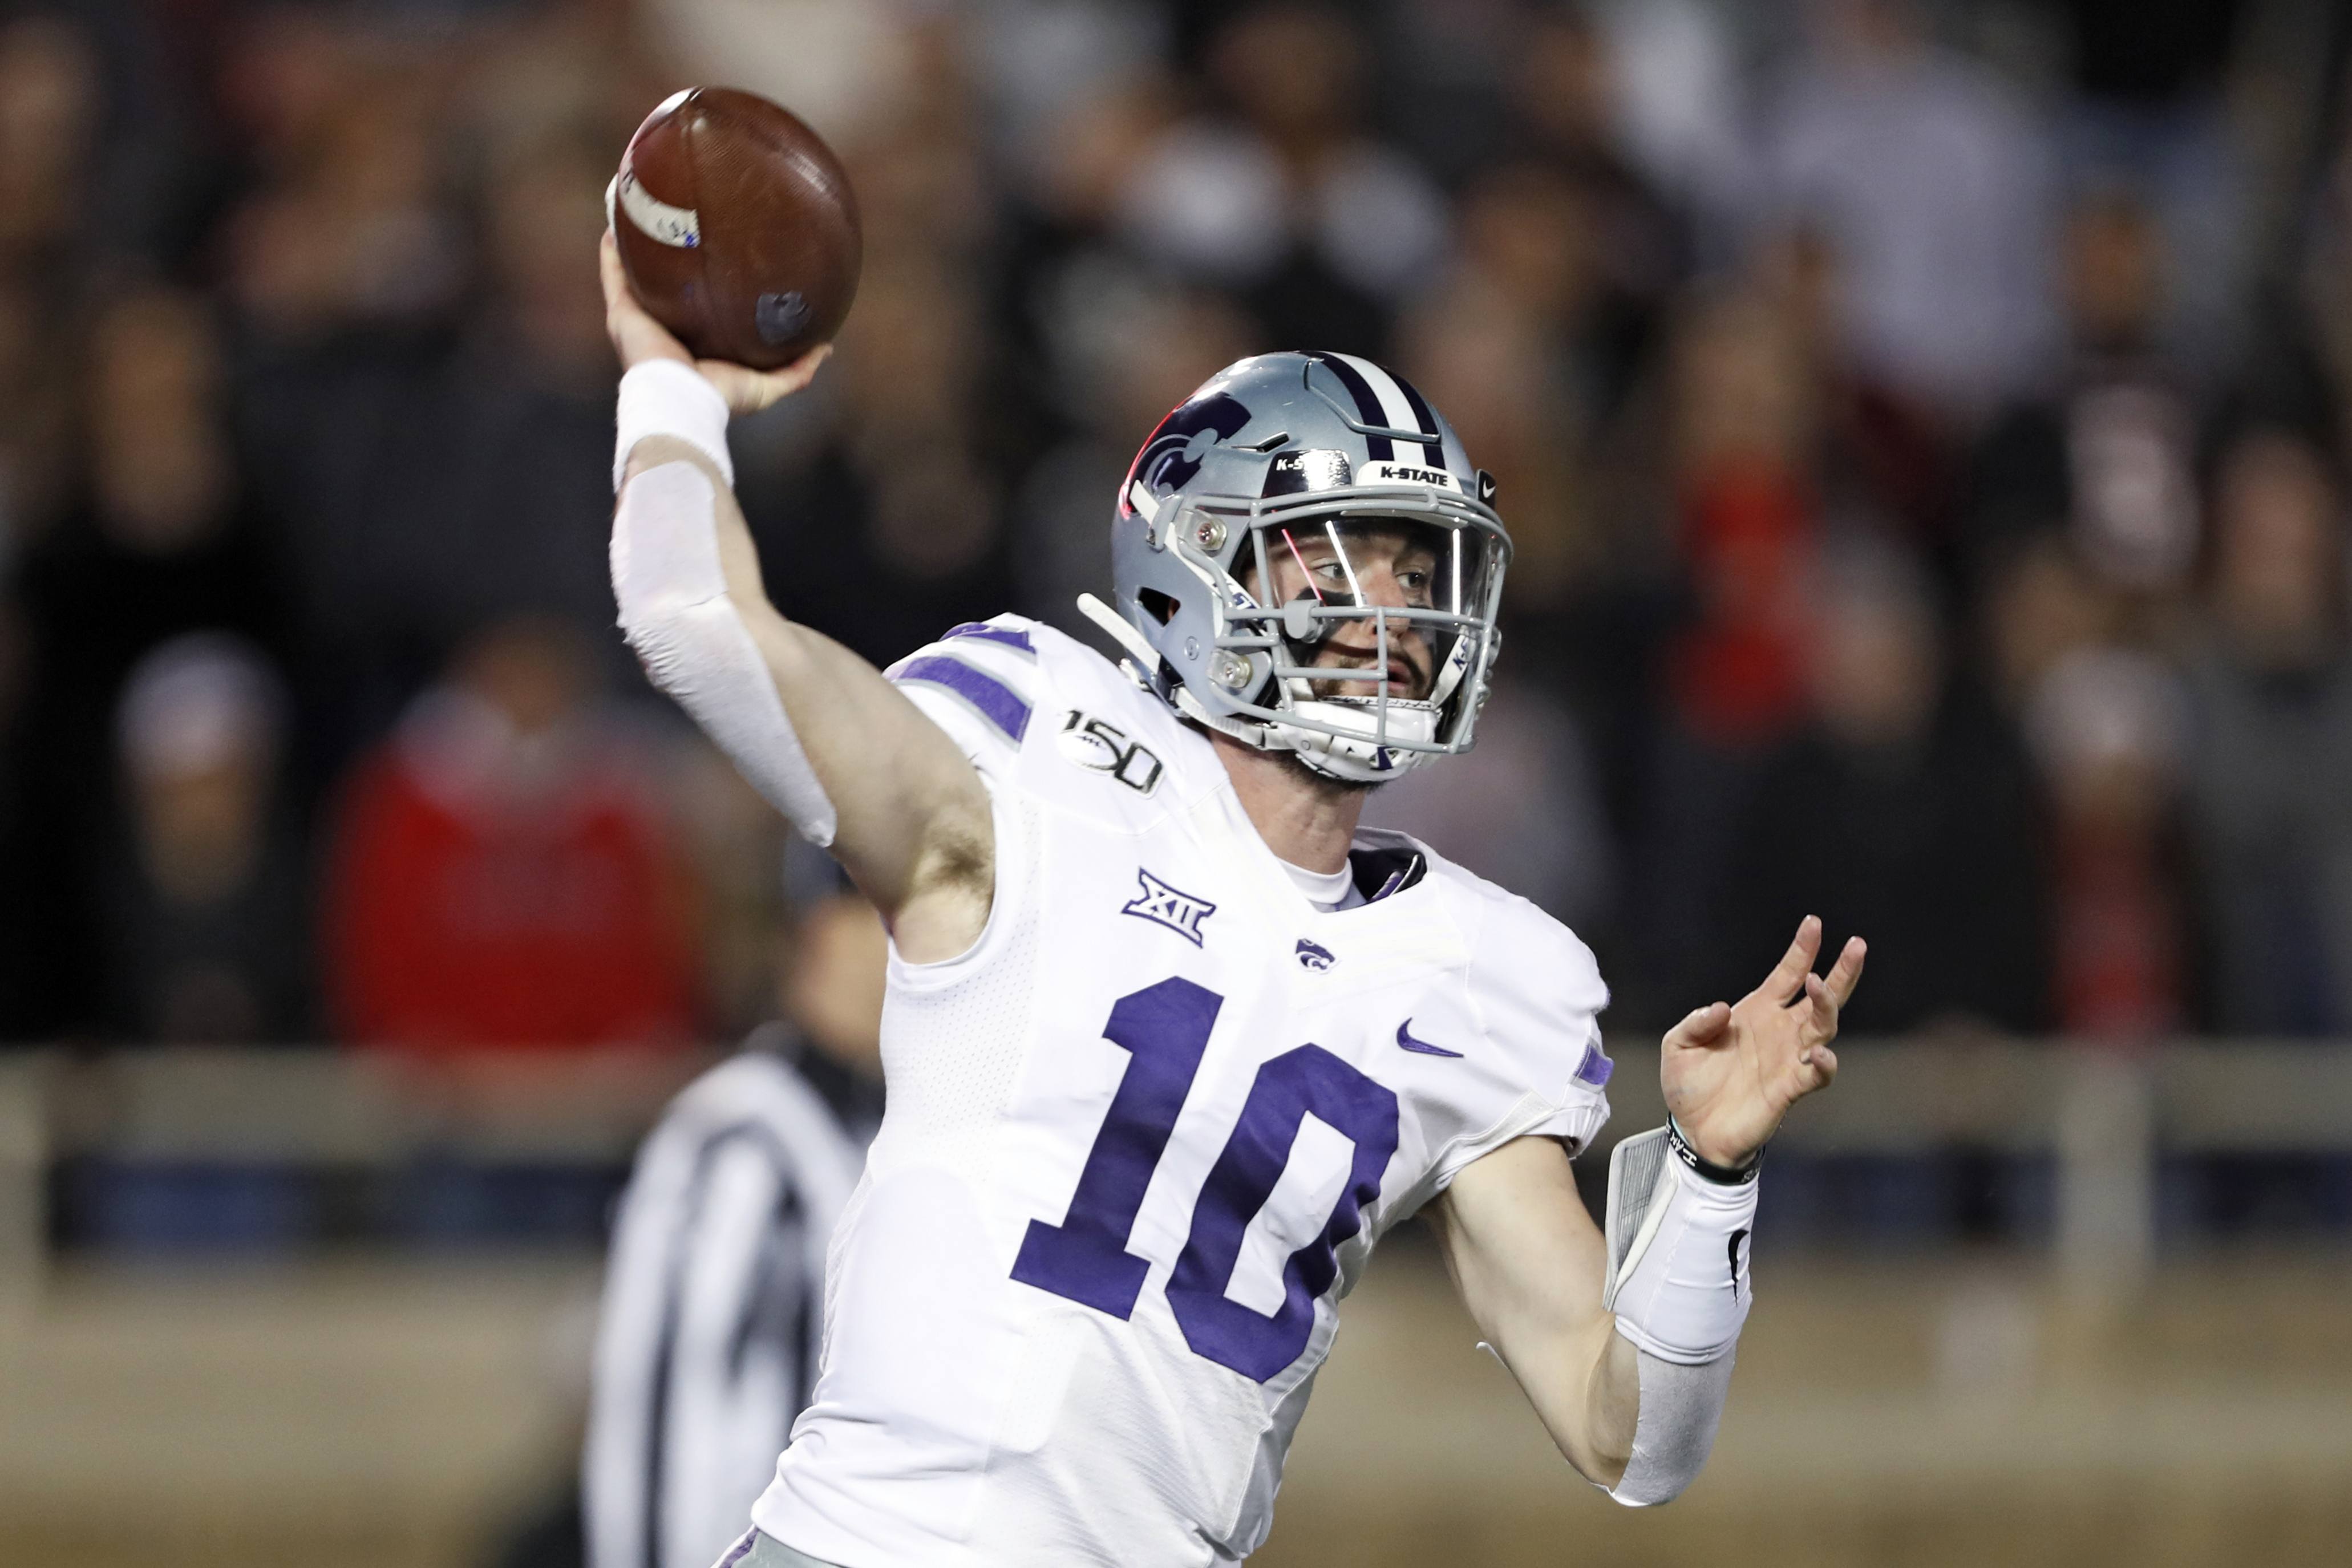 100-yard kickoff return sparks K-State past Texas Tech 30-27